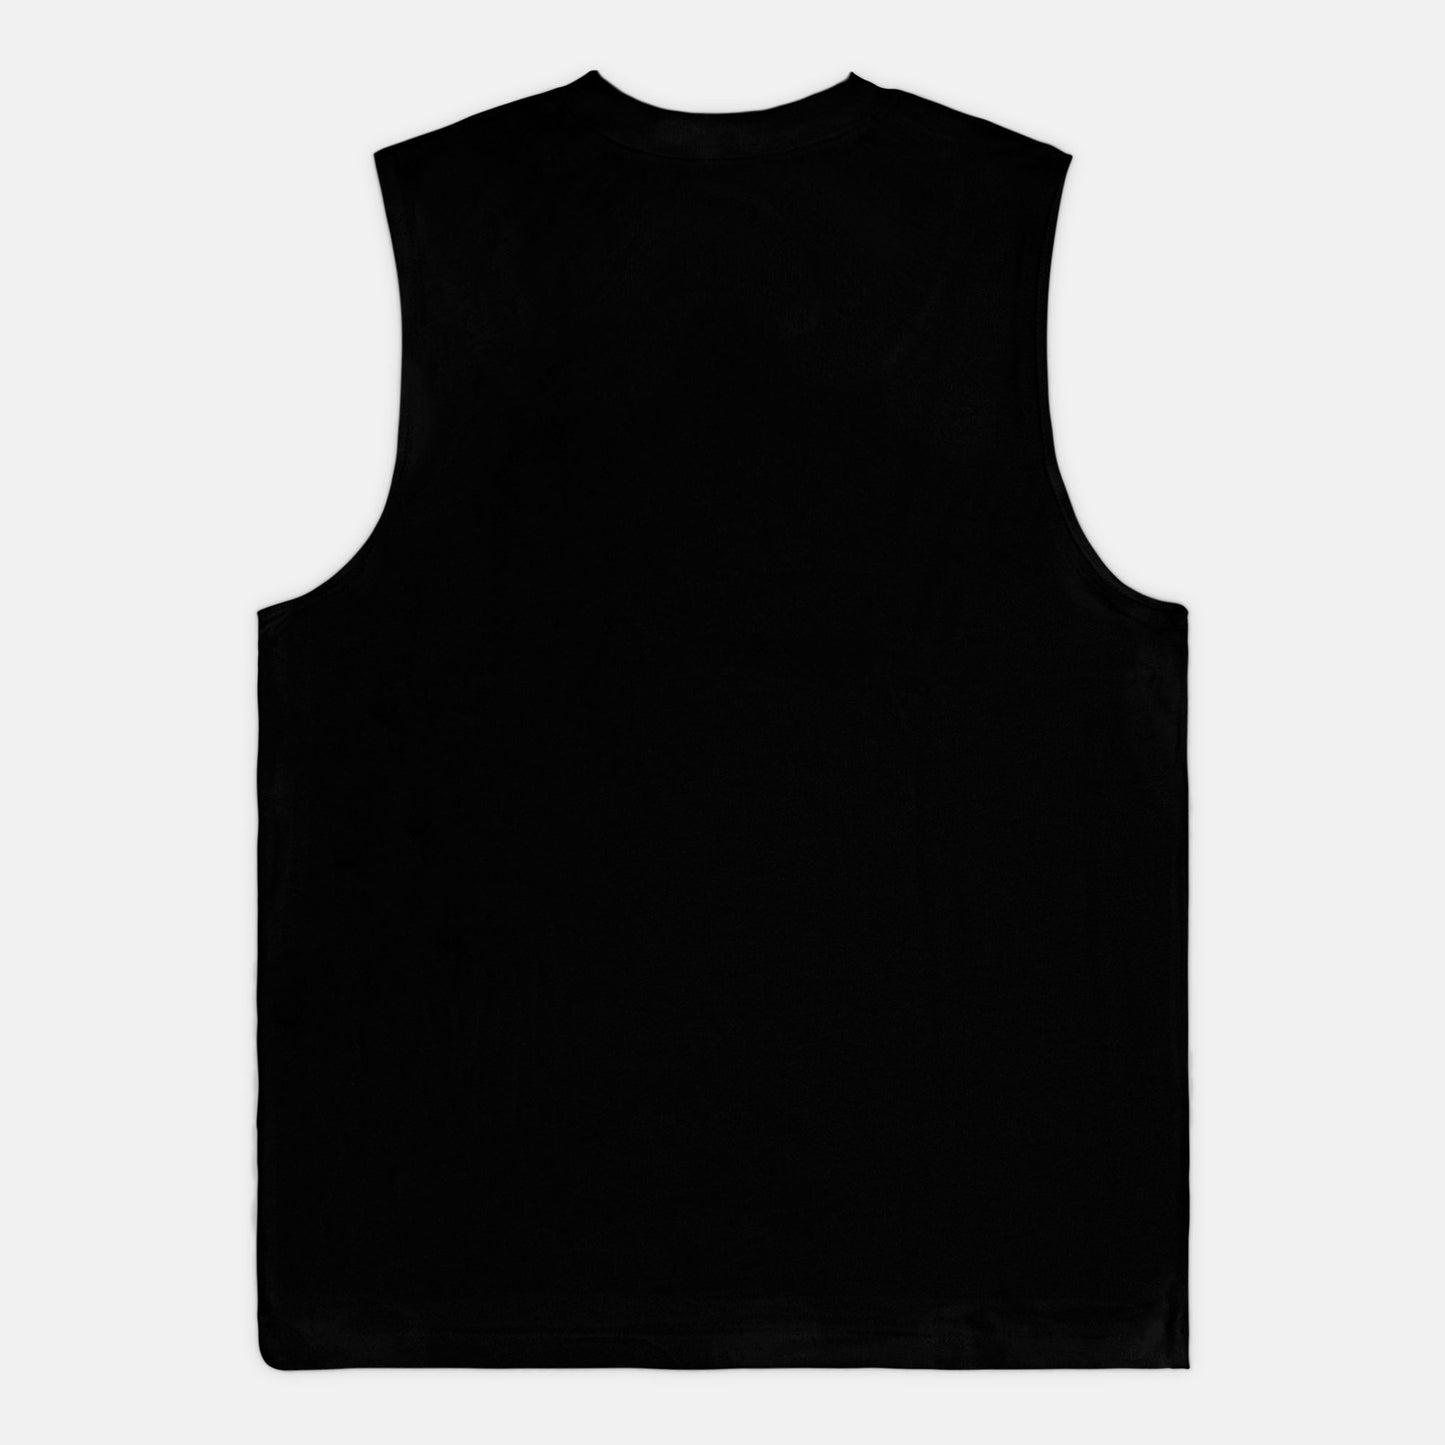 Is The Best Dad Ever Personalized Muscle Tank